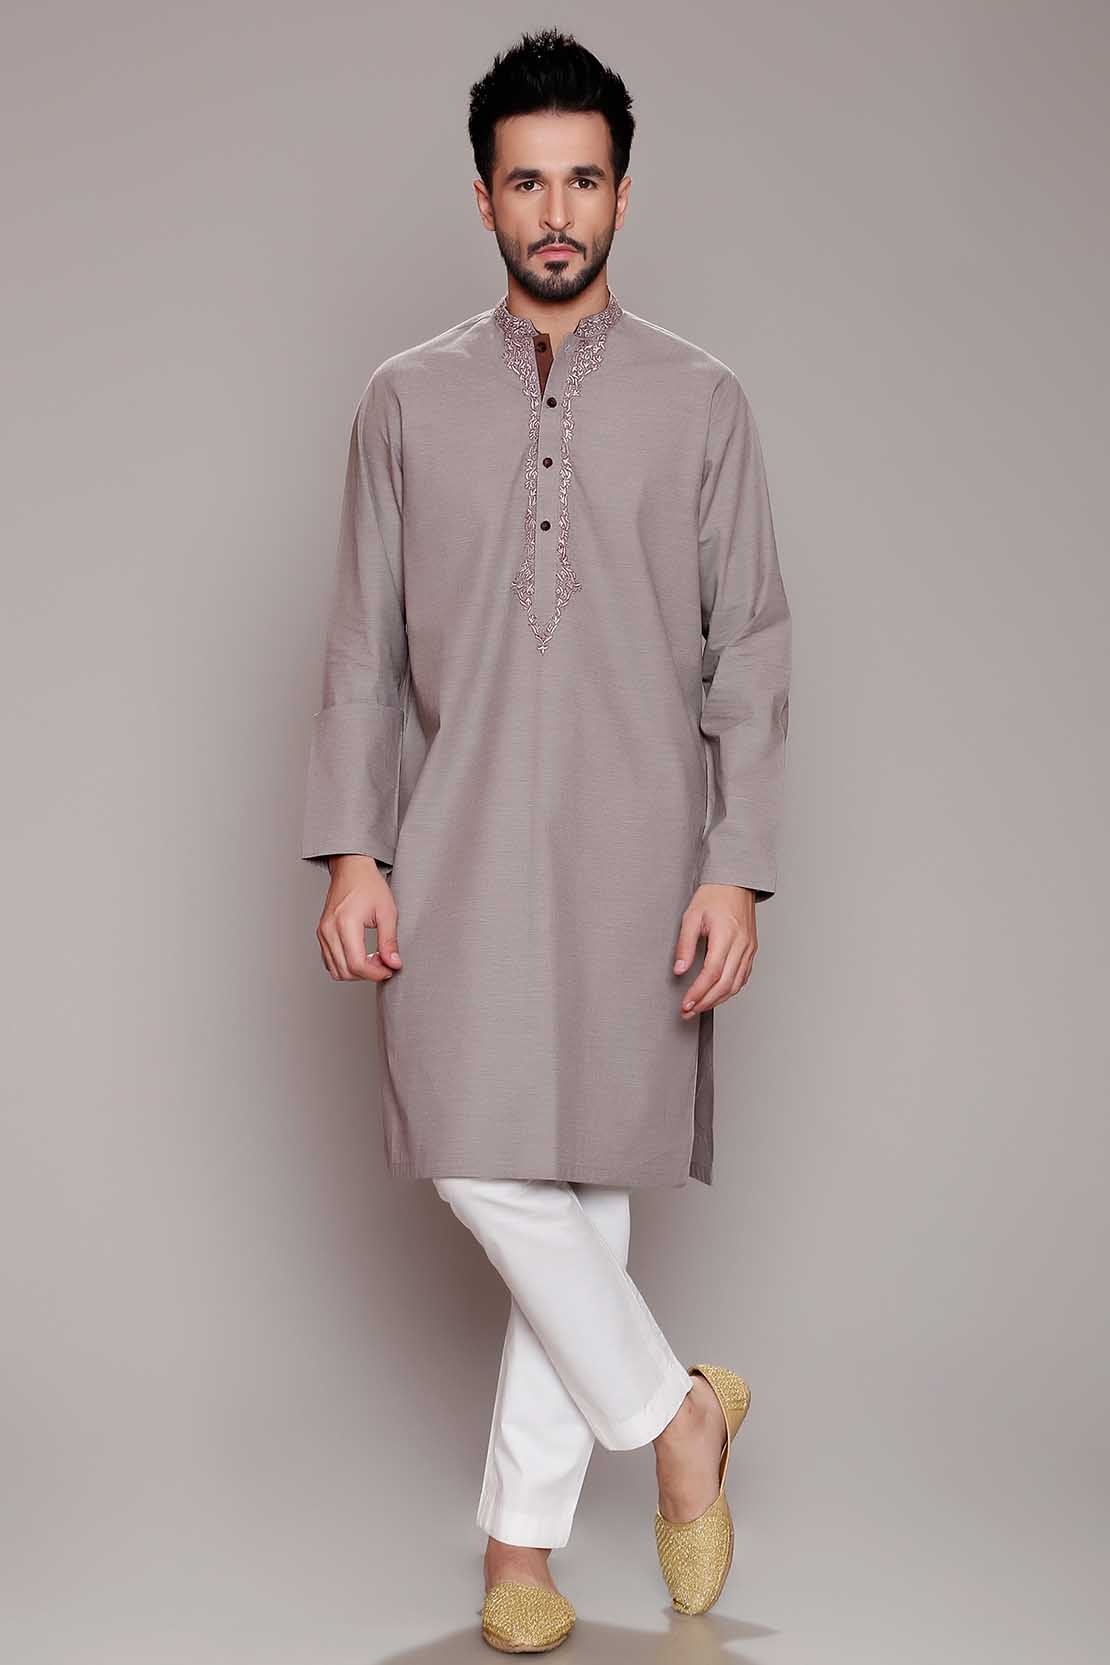 Latest Men Modern Kurta Styles Designs Collection 2022 by Chinyere